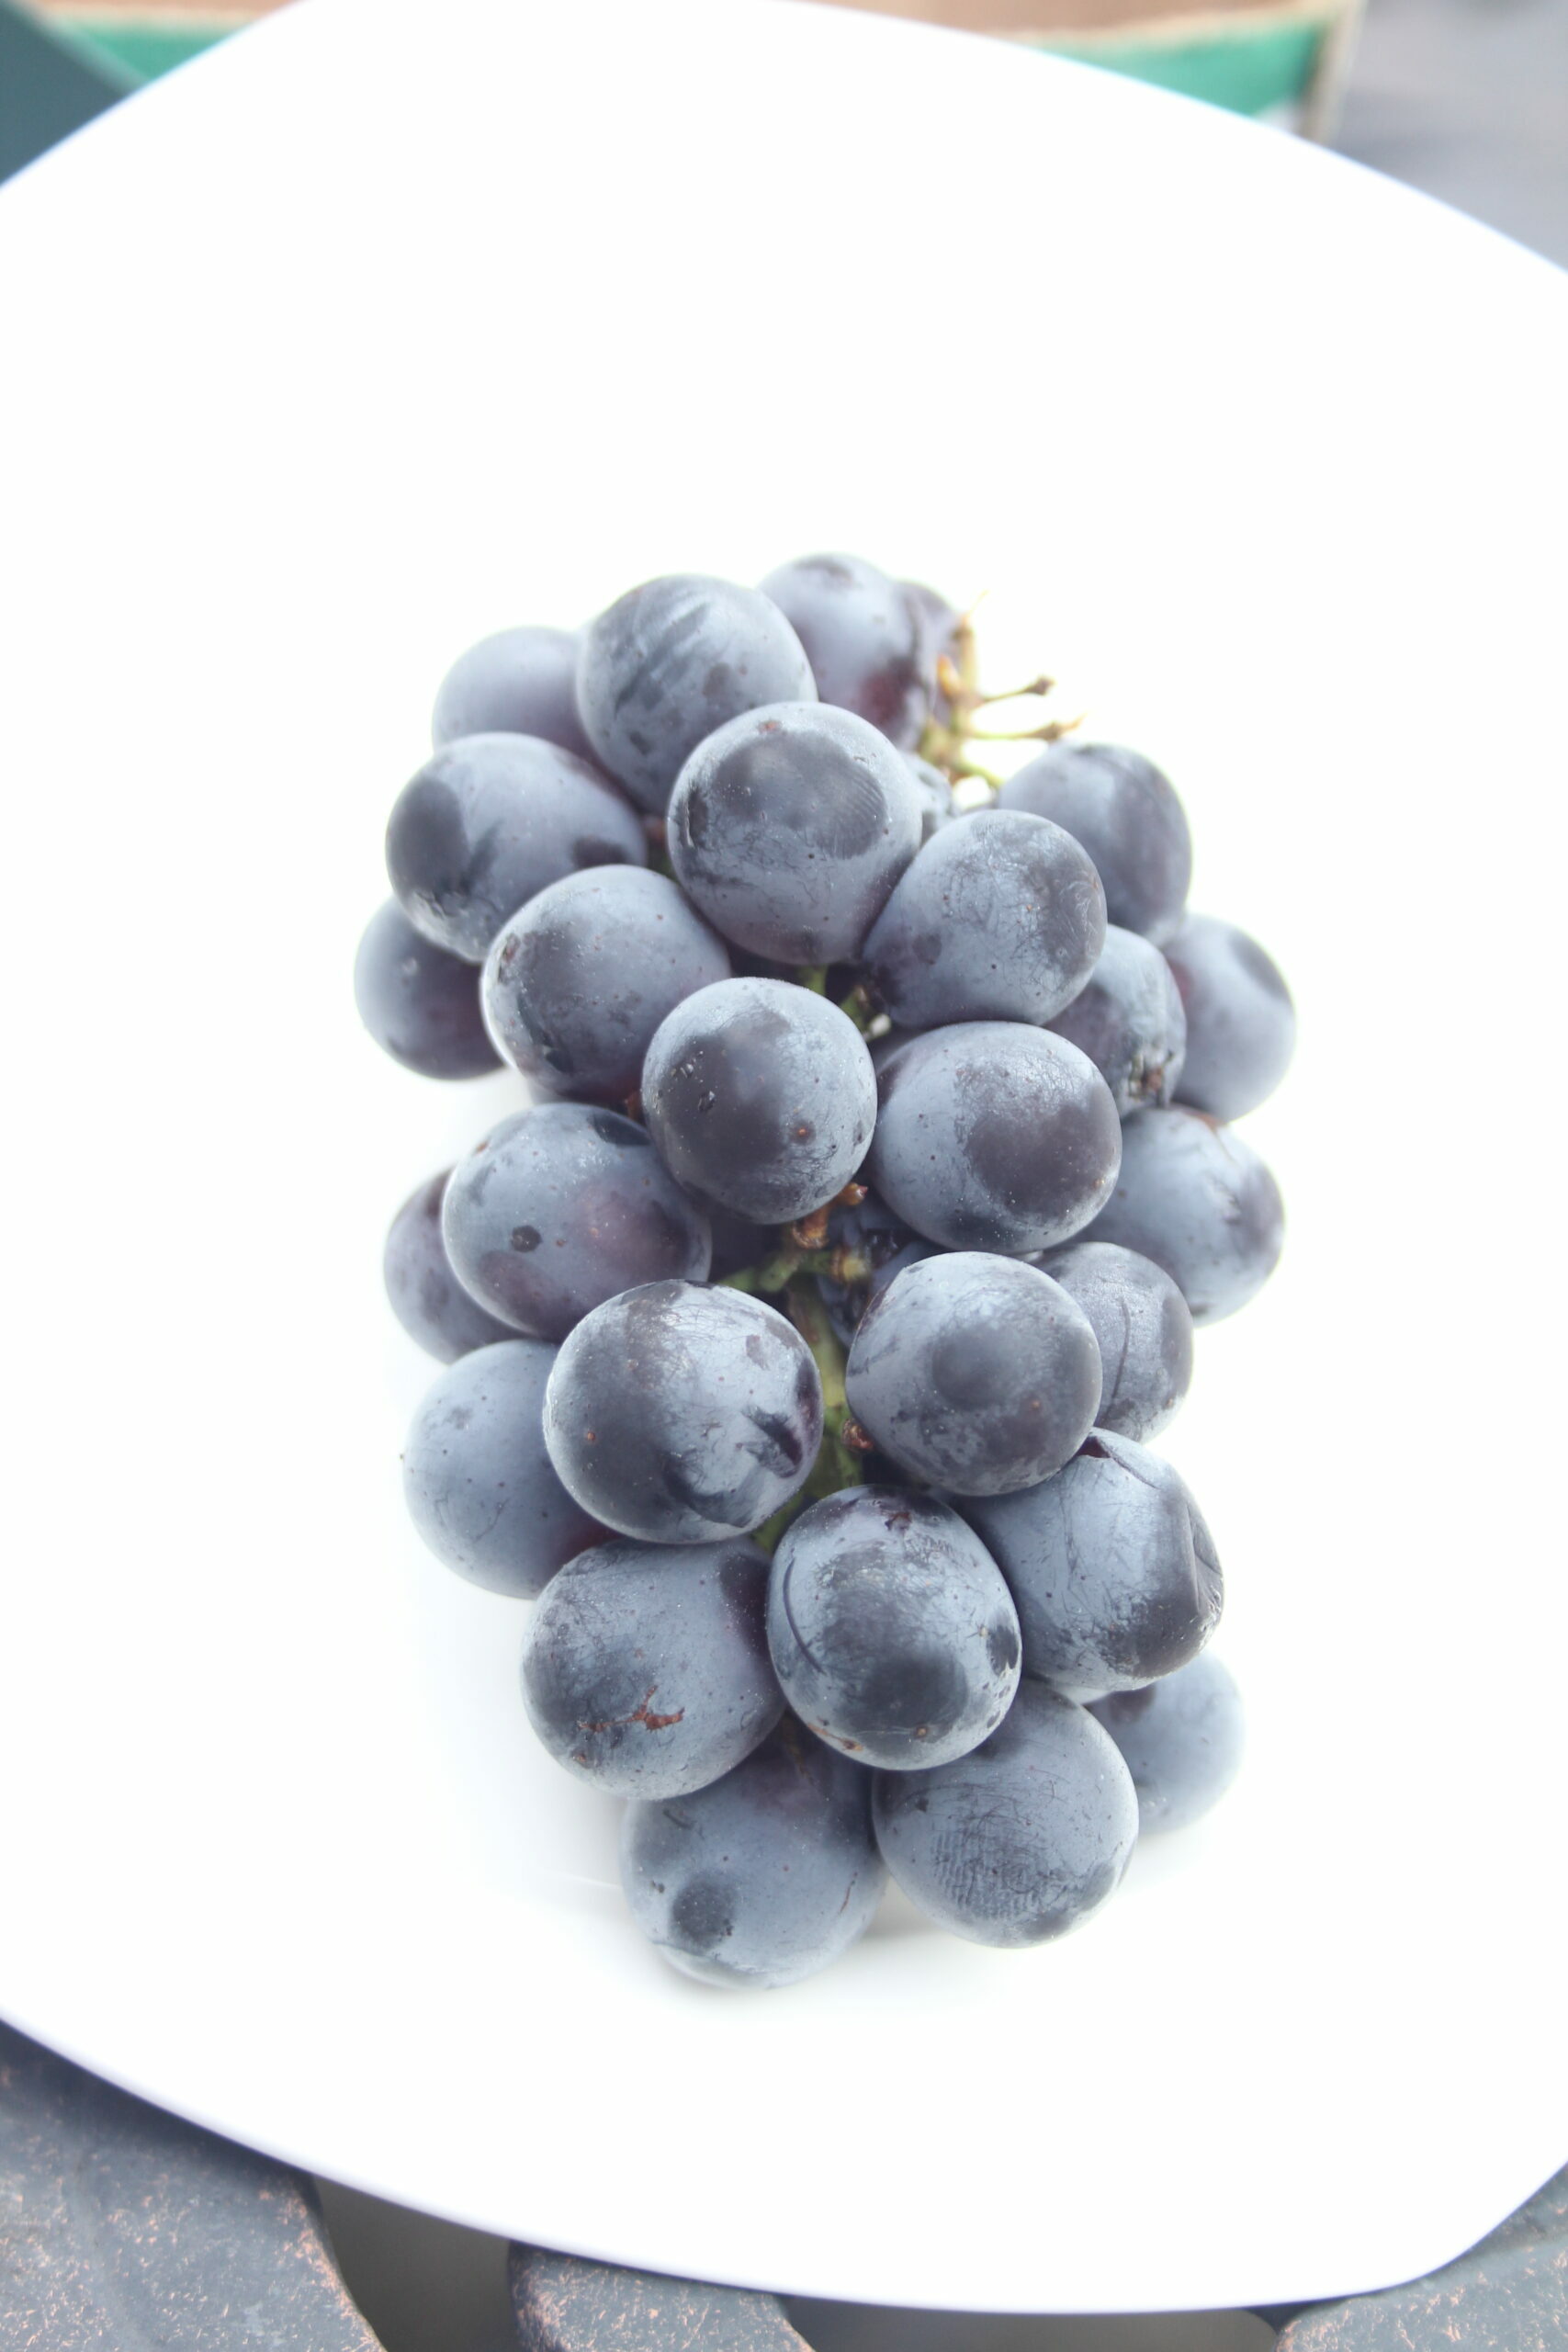 blueberry and grape polyphenols improve cognition, memory and attention in students